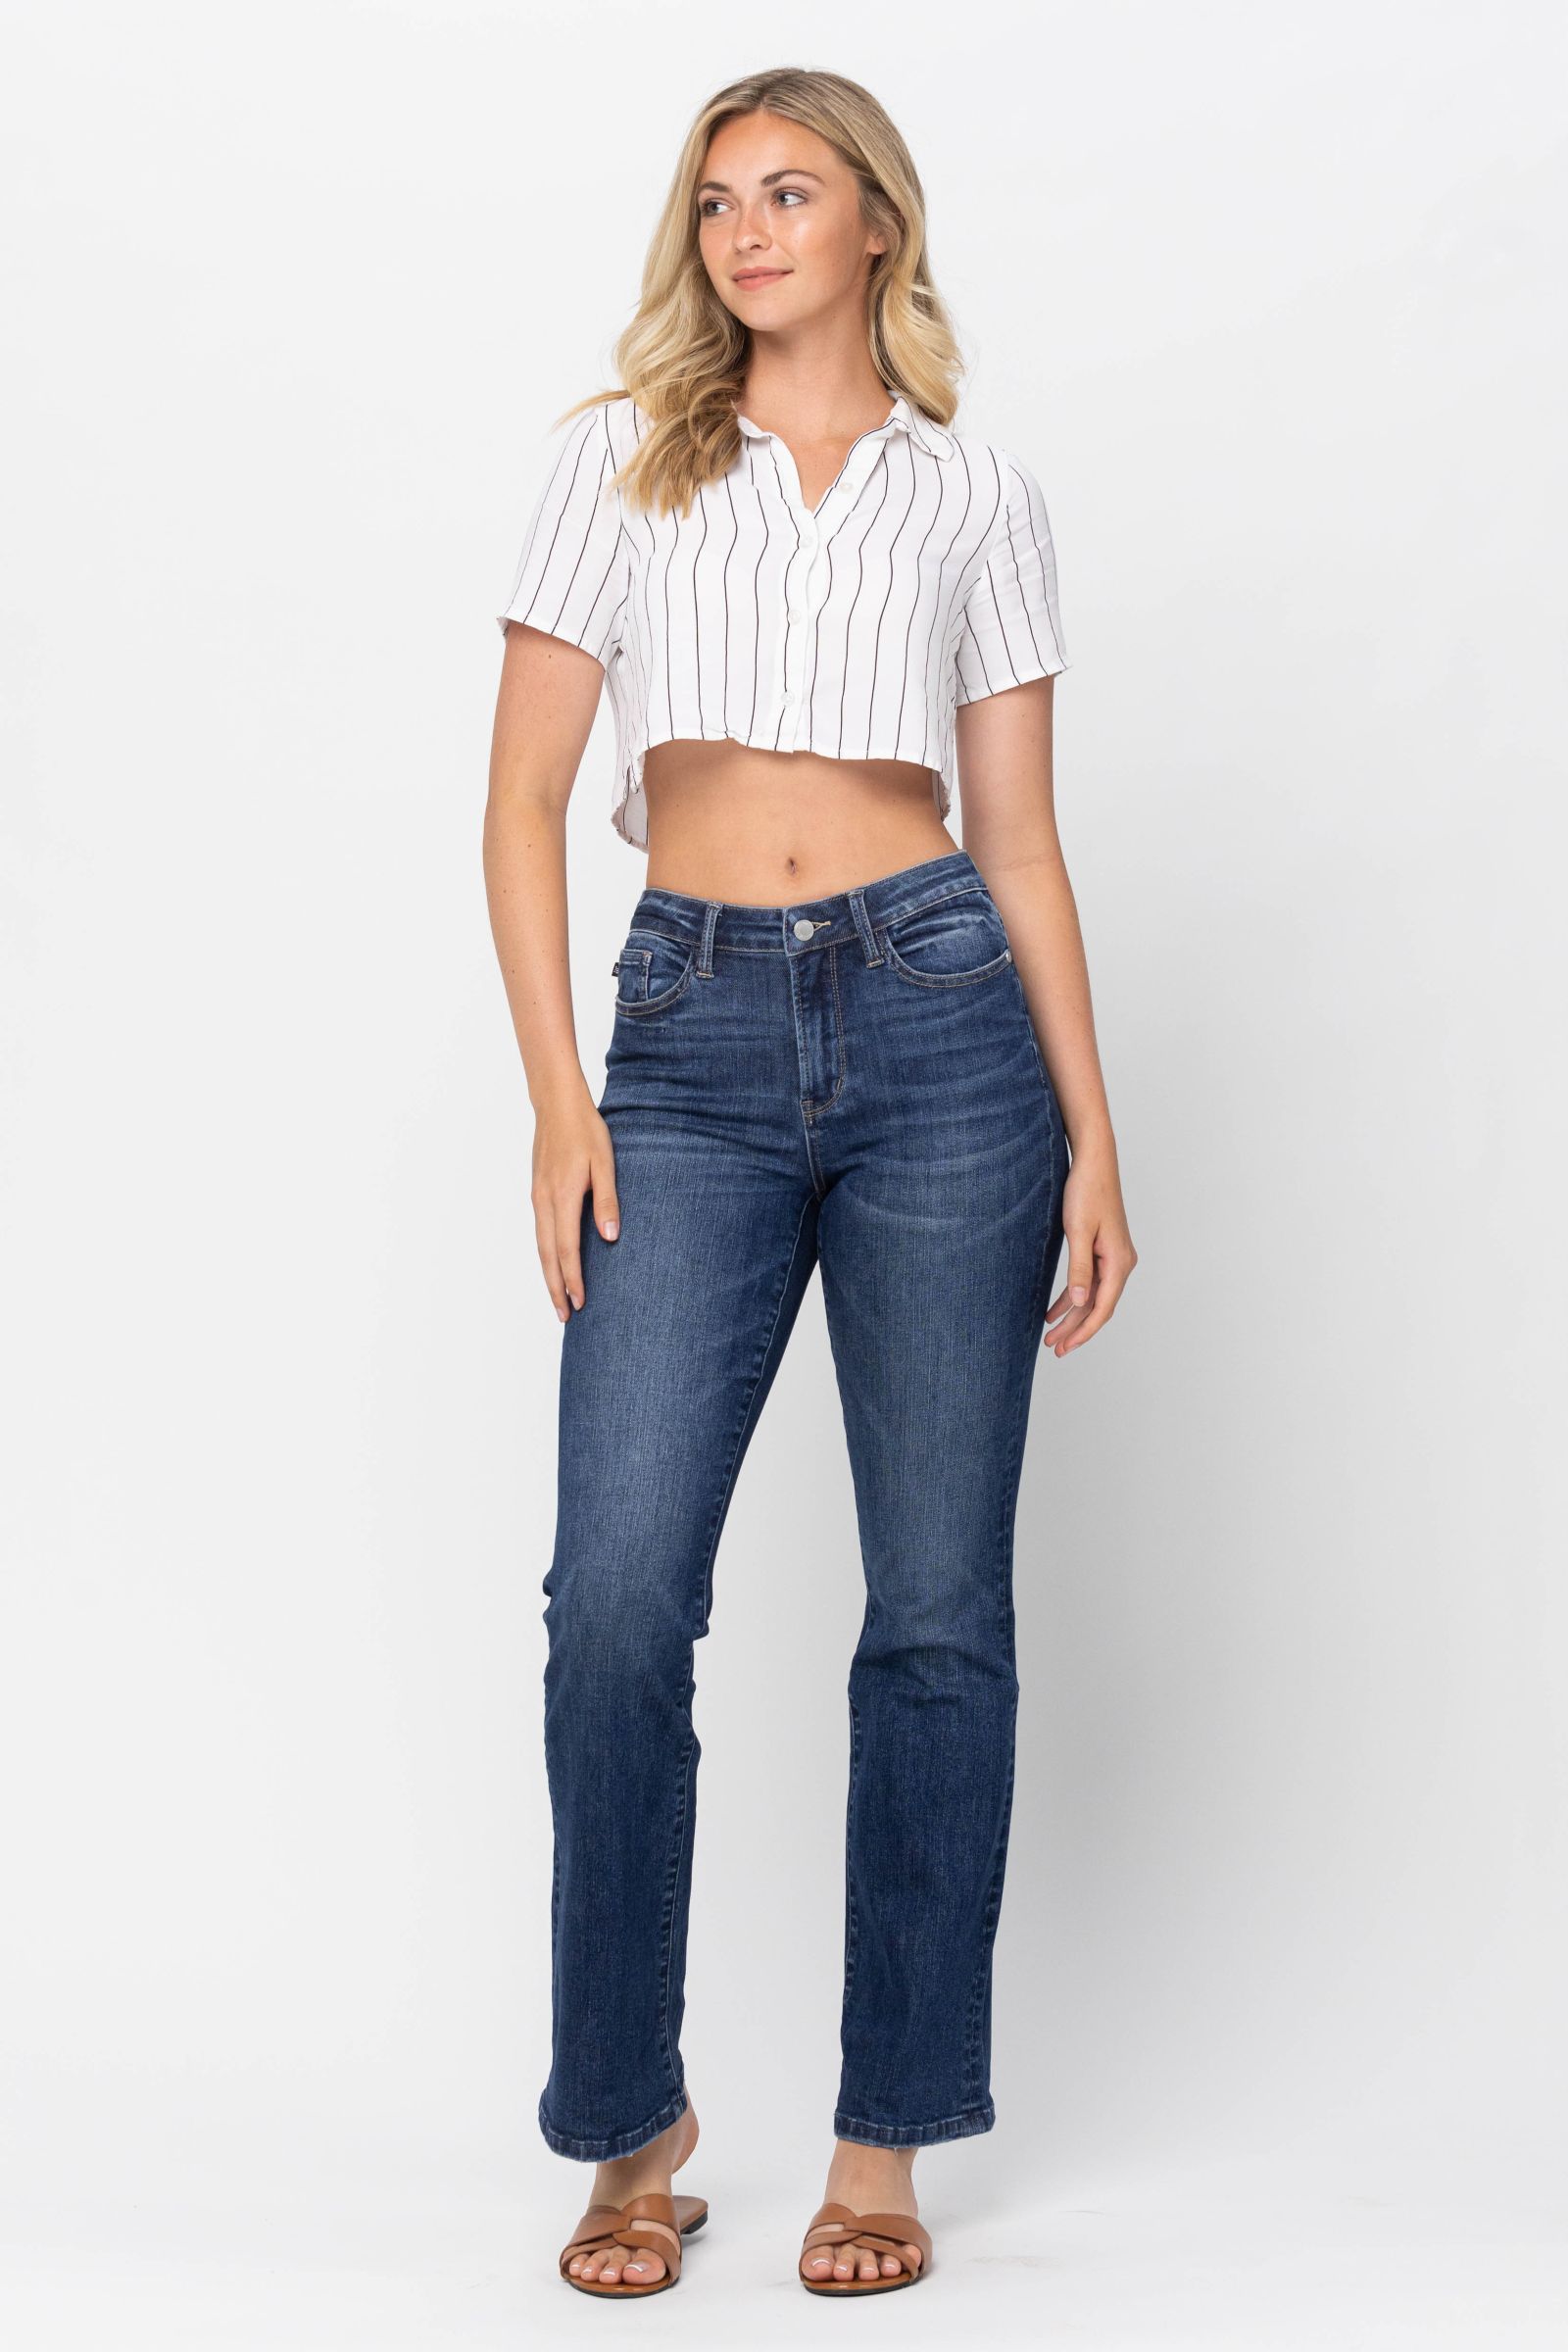 Judy Blue mid-rise classic non-distressed bootcut jeans